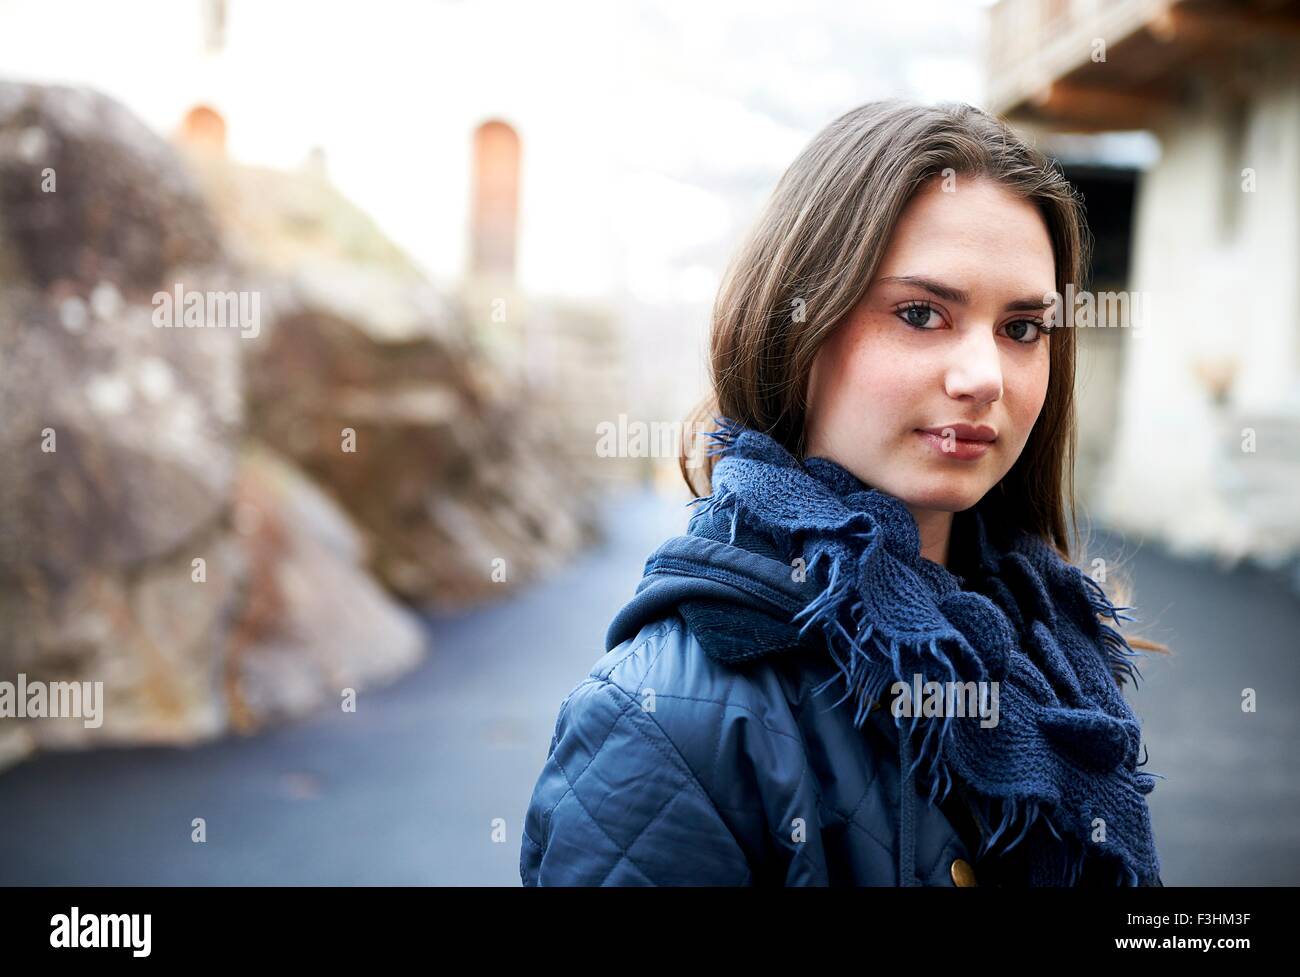 Portrait of teenage girl wearing scarf Banque D'Images